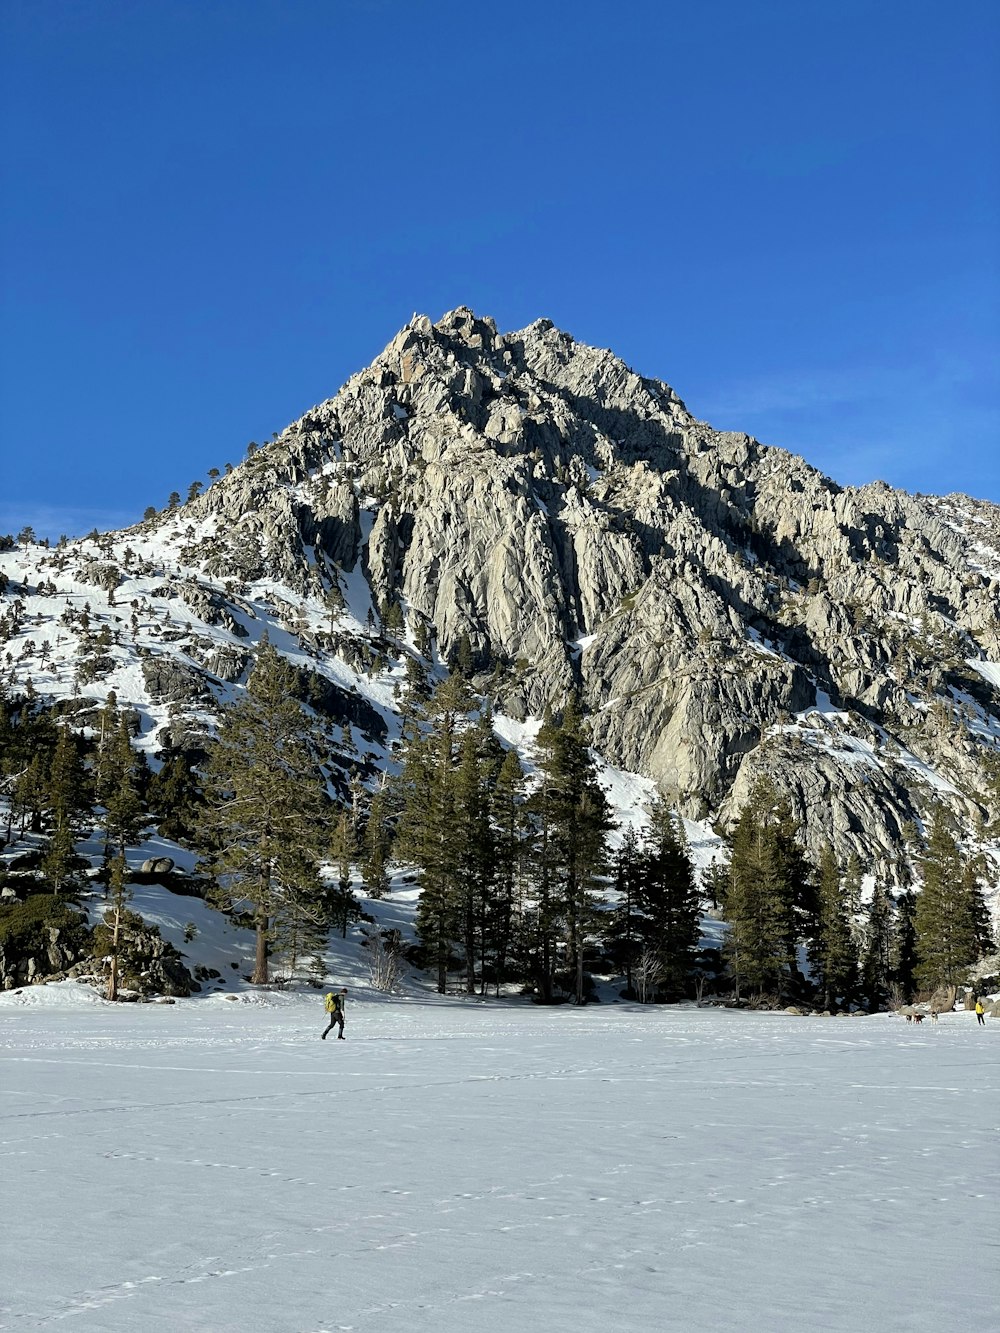 a person skiing in the snow near a mountain